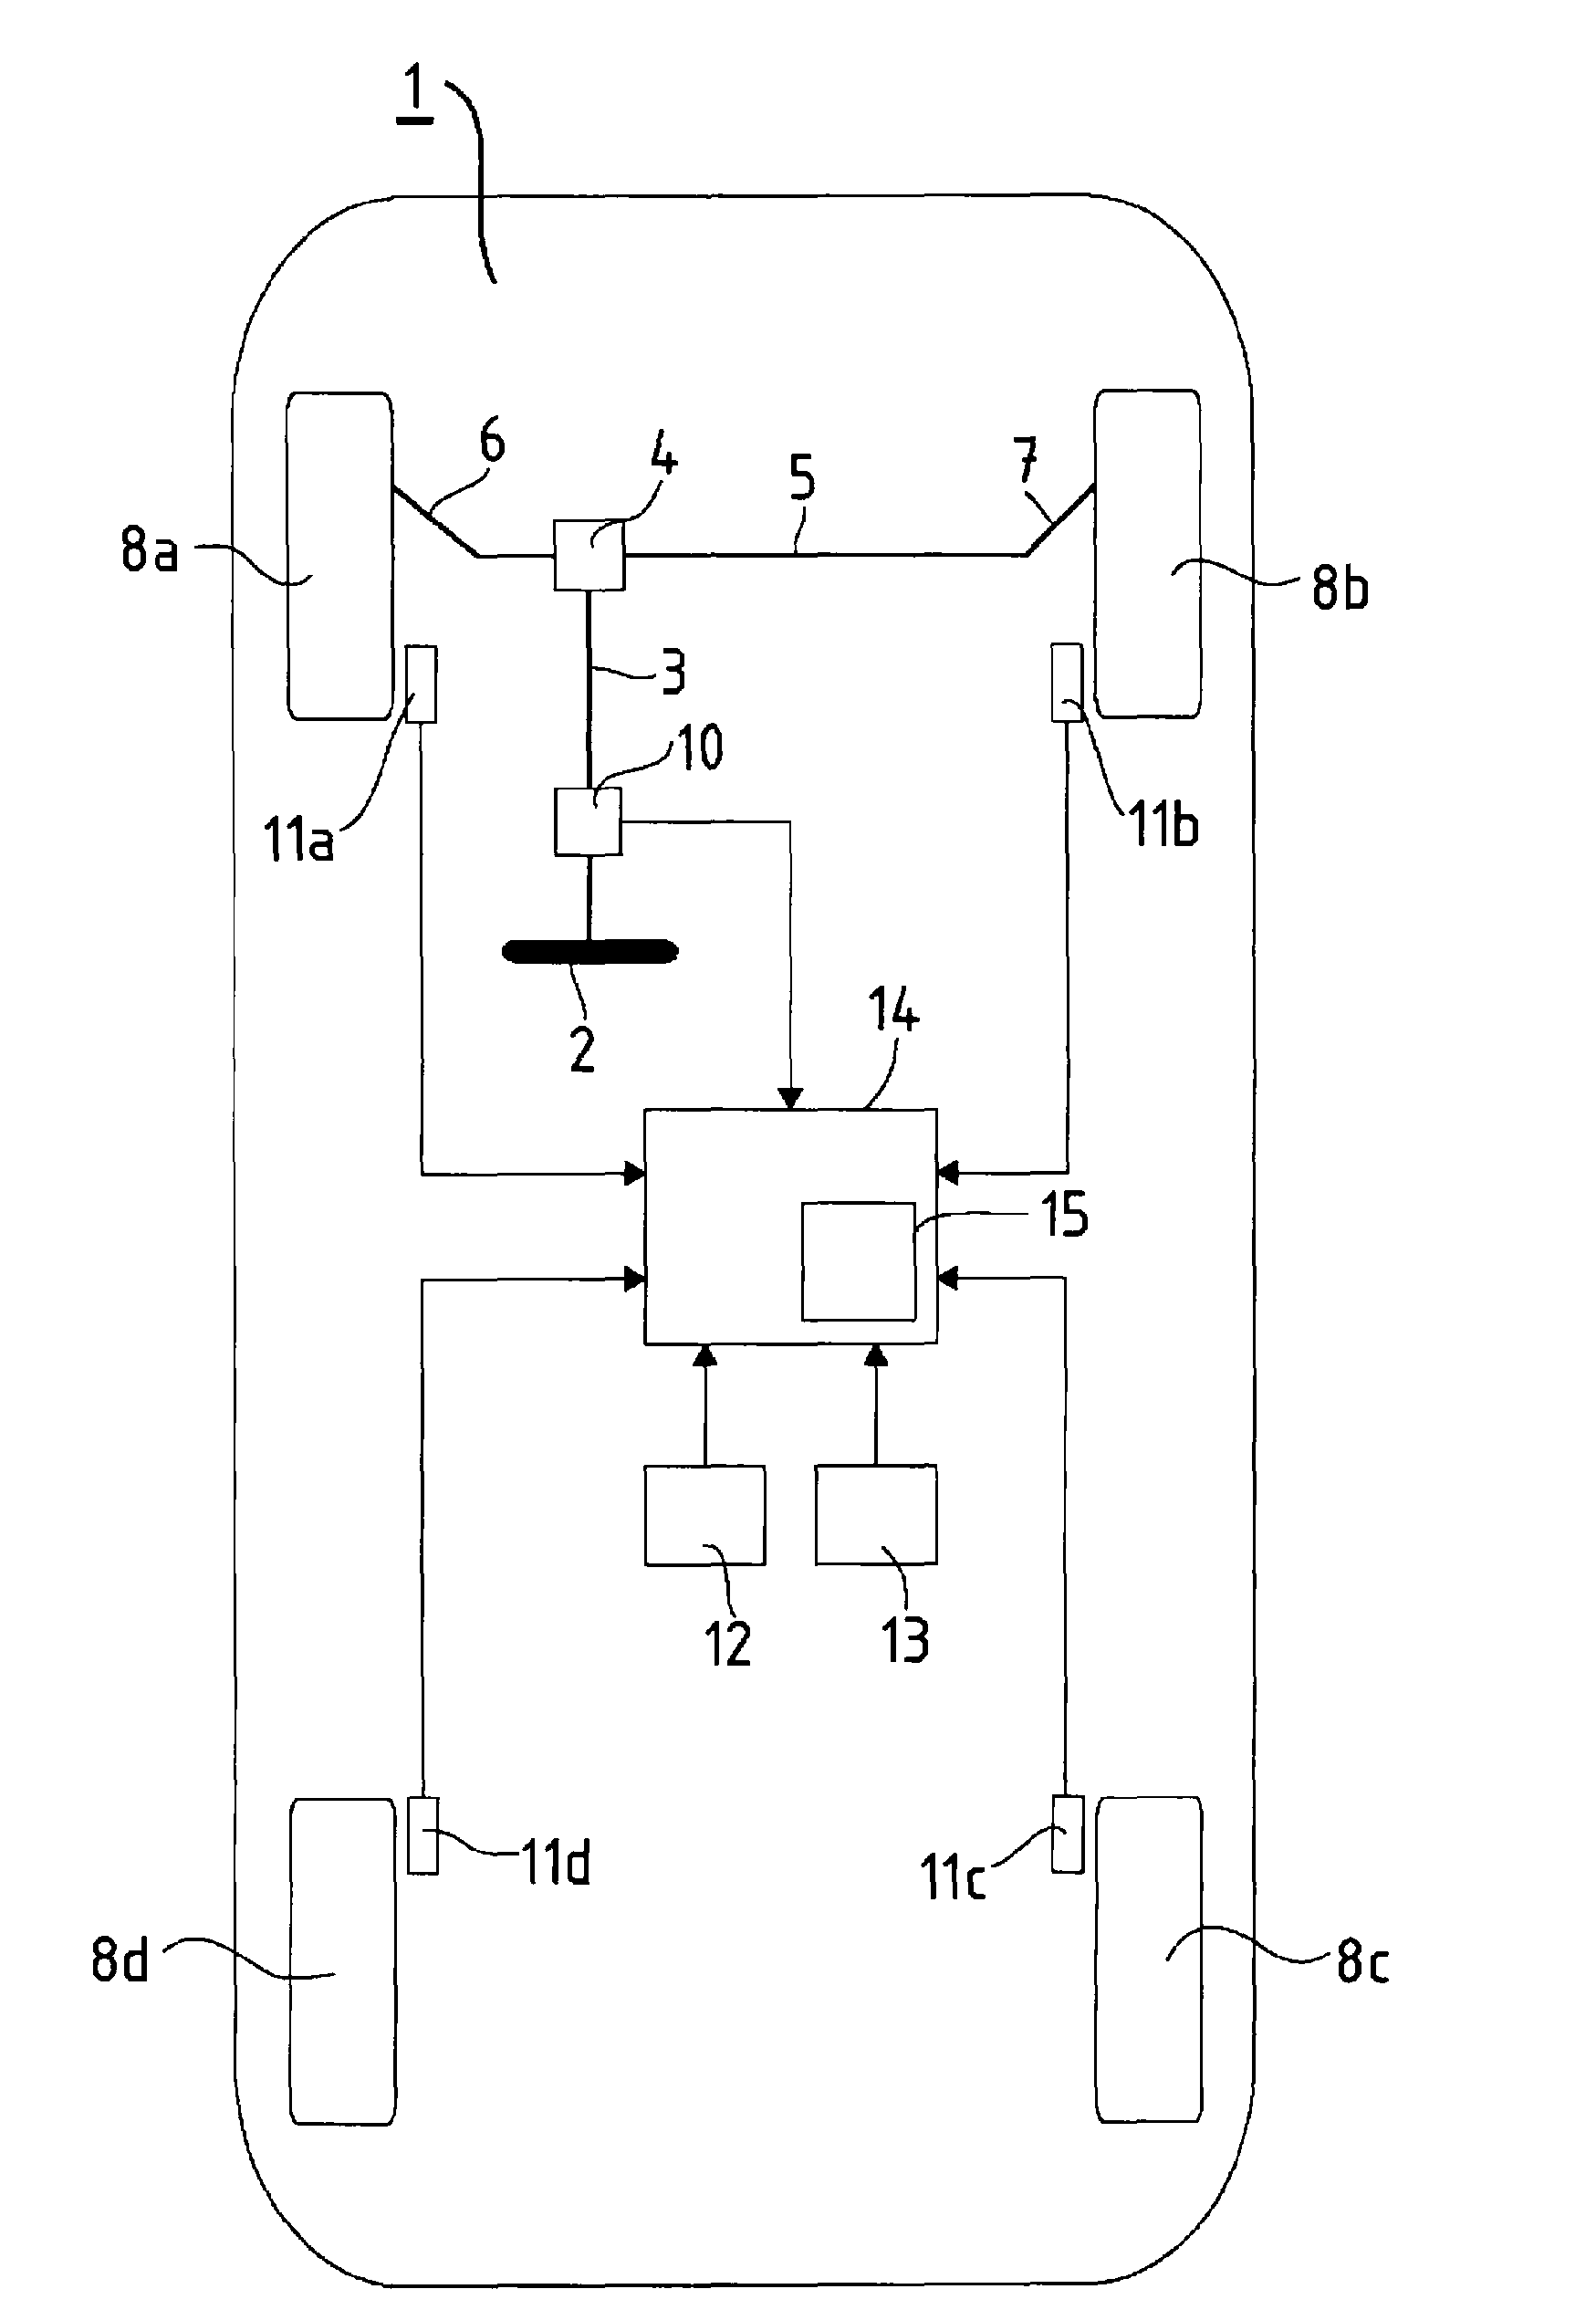 Method for determining unstable driving states